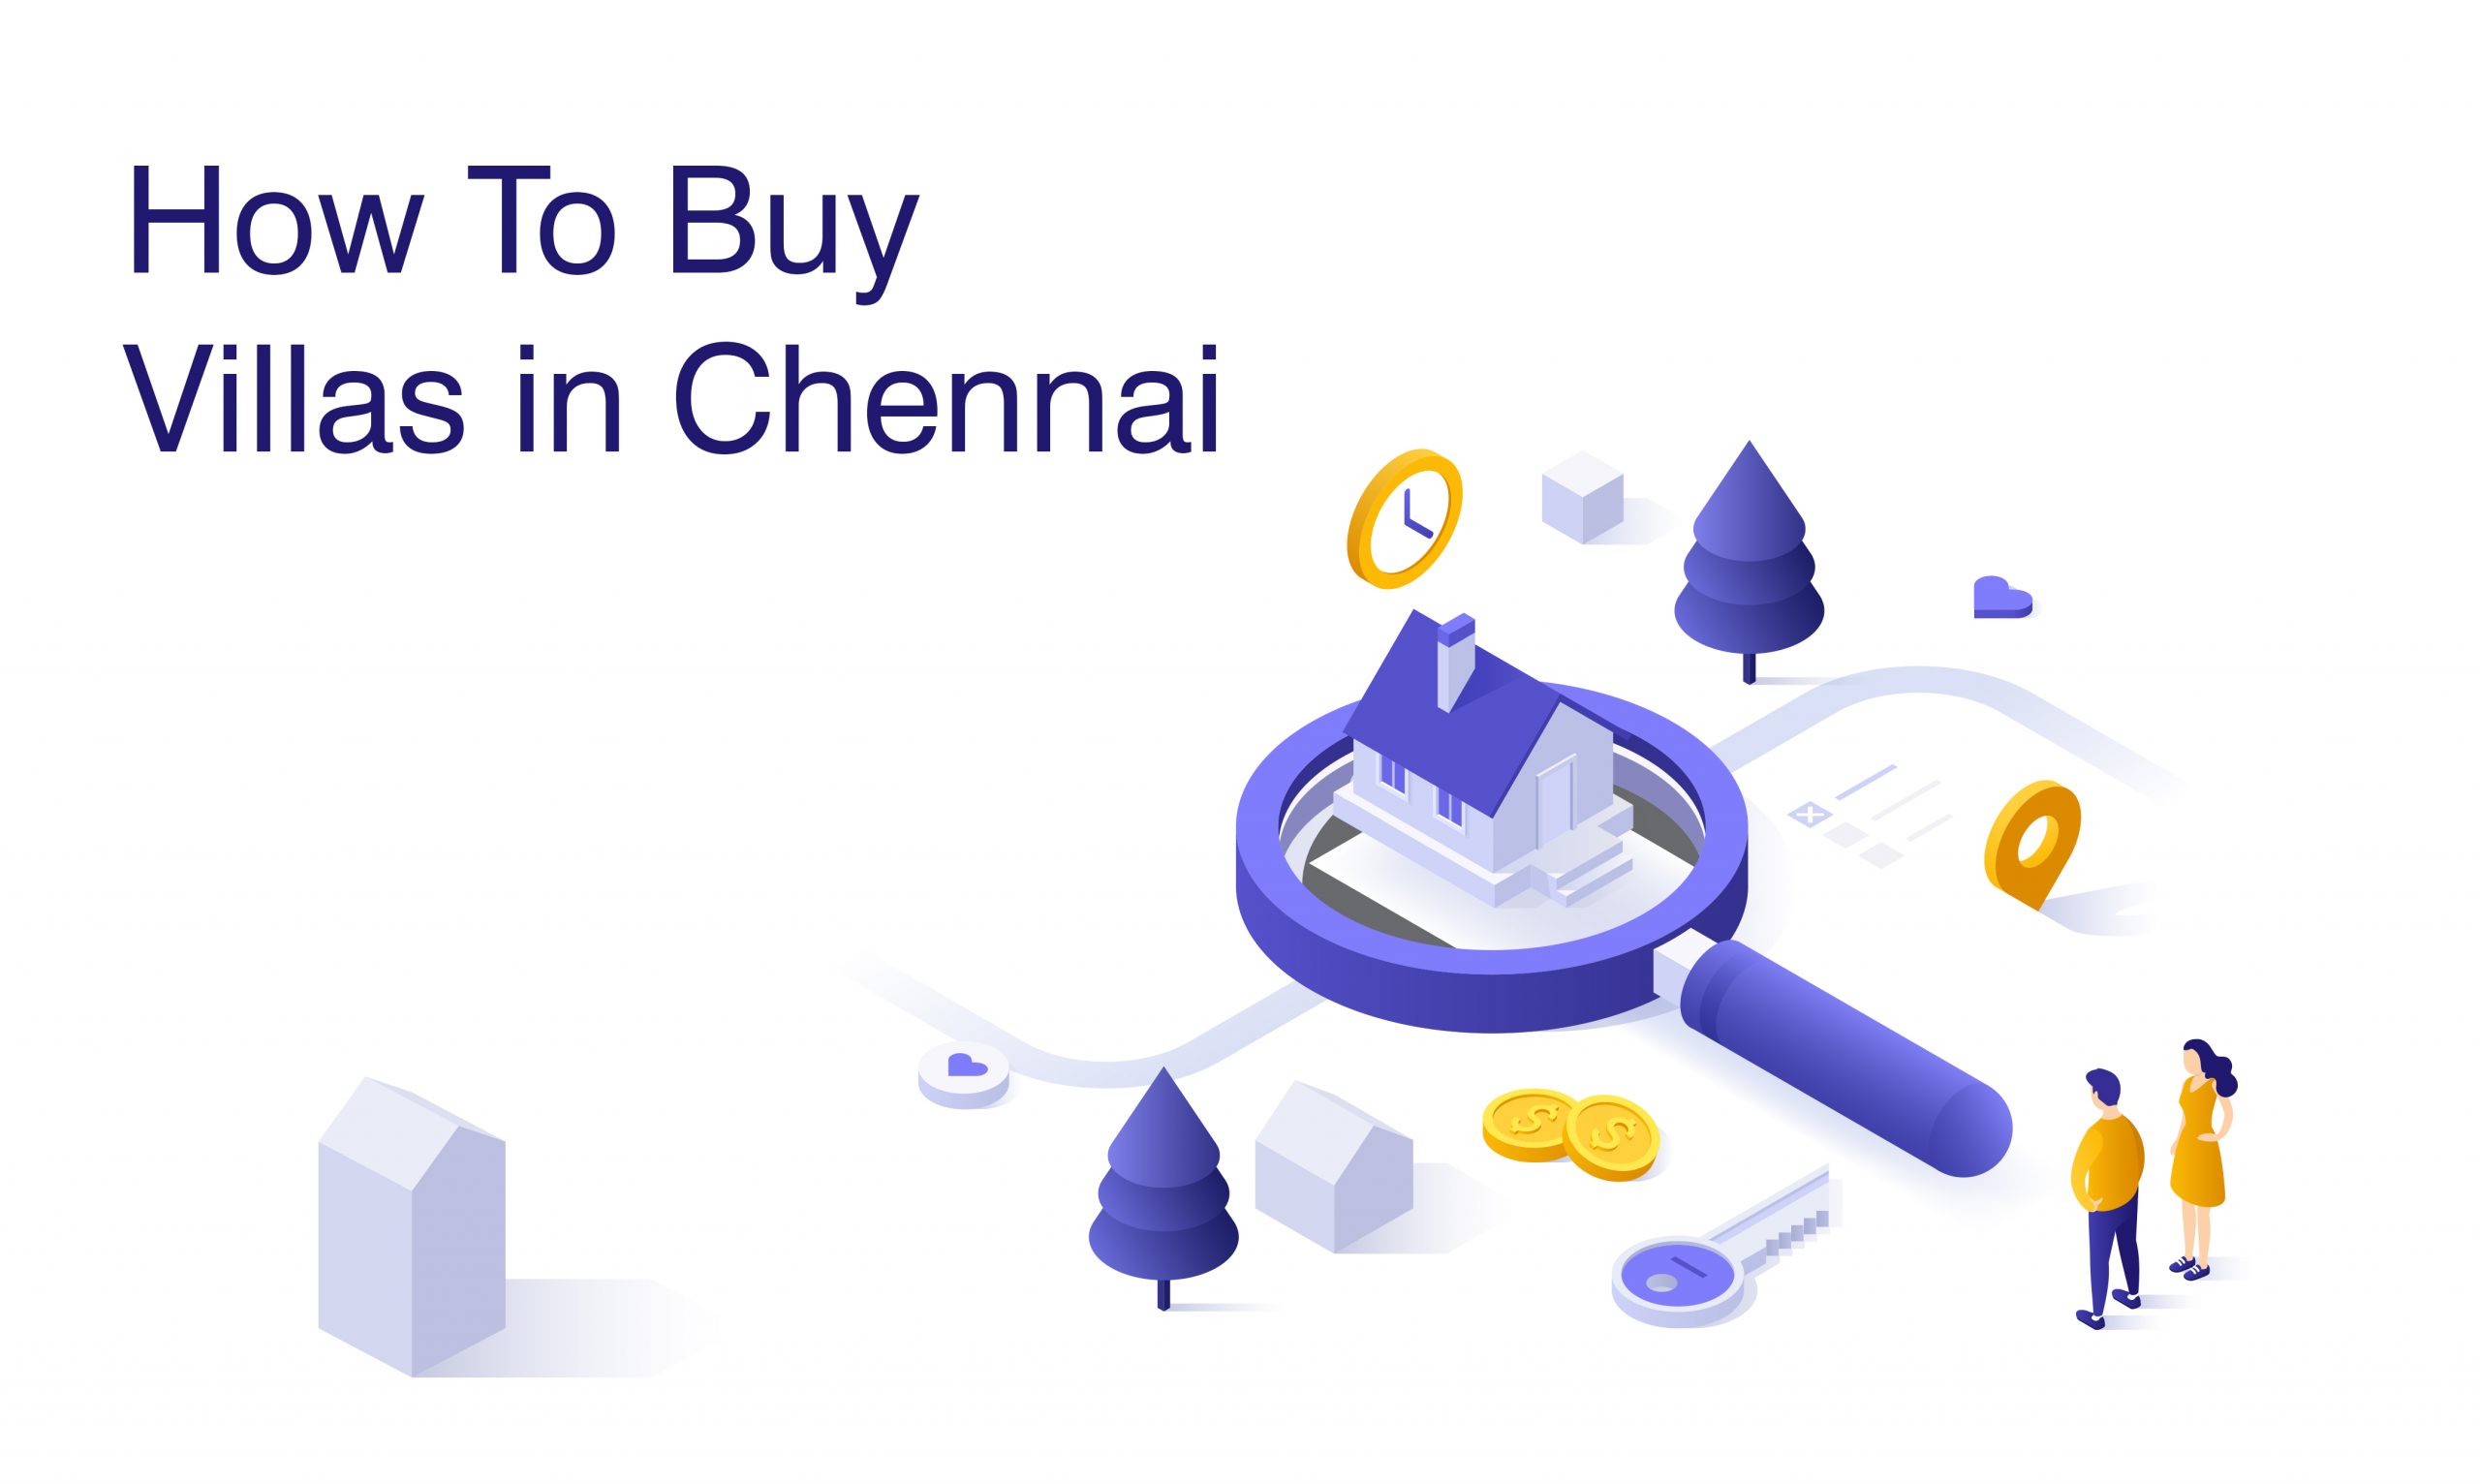 How to Buy Villas in Chennai